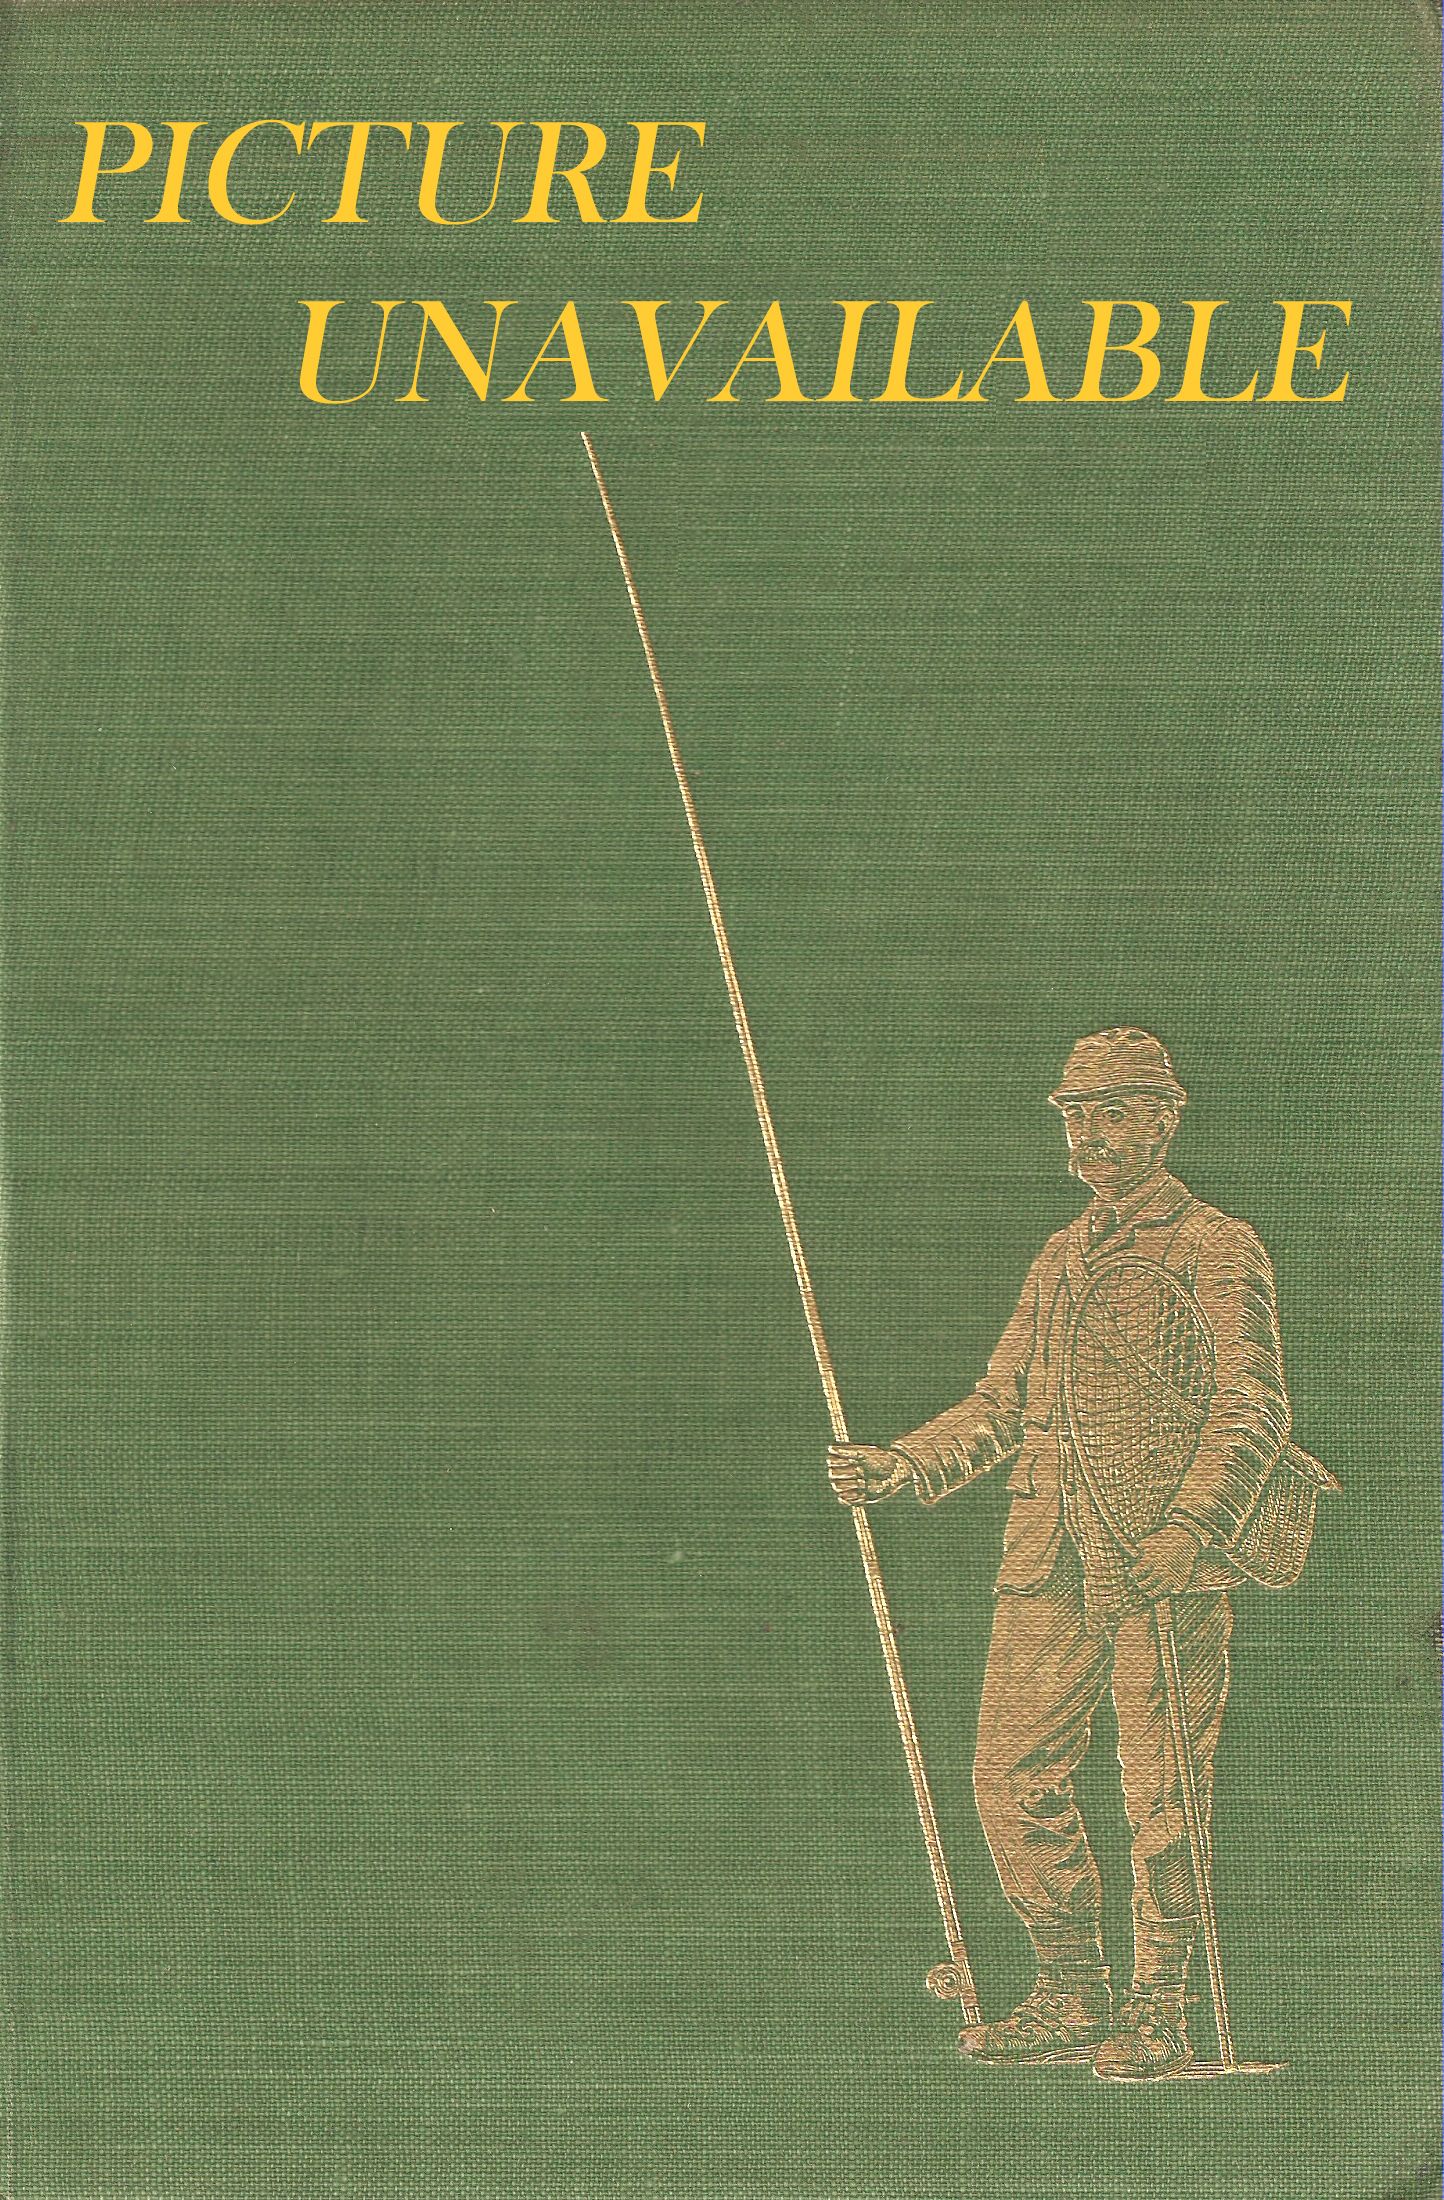 A GAMEKEEPER'S HANDBOOK. Edited and published by Gilbertson and Page Limited.